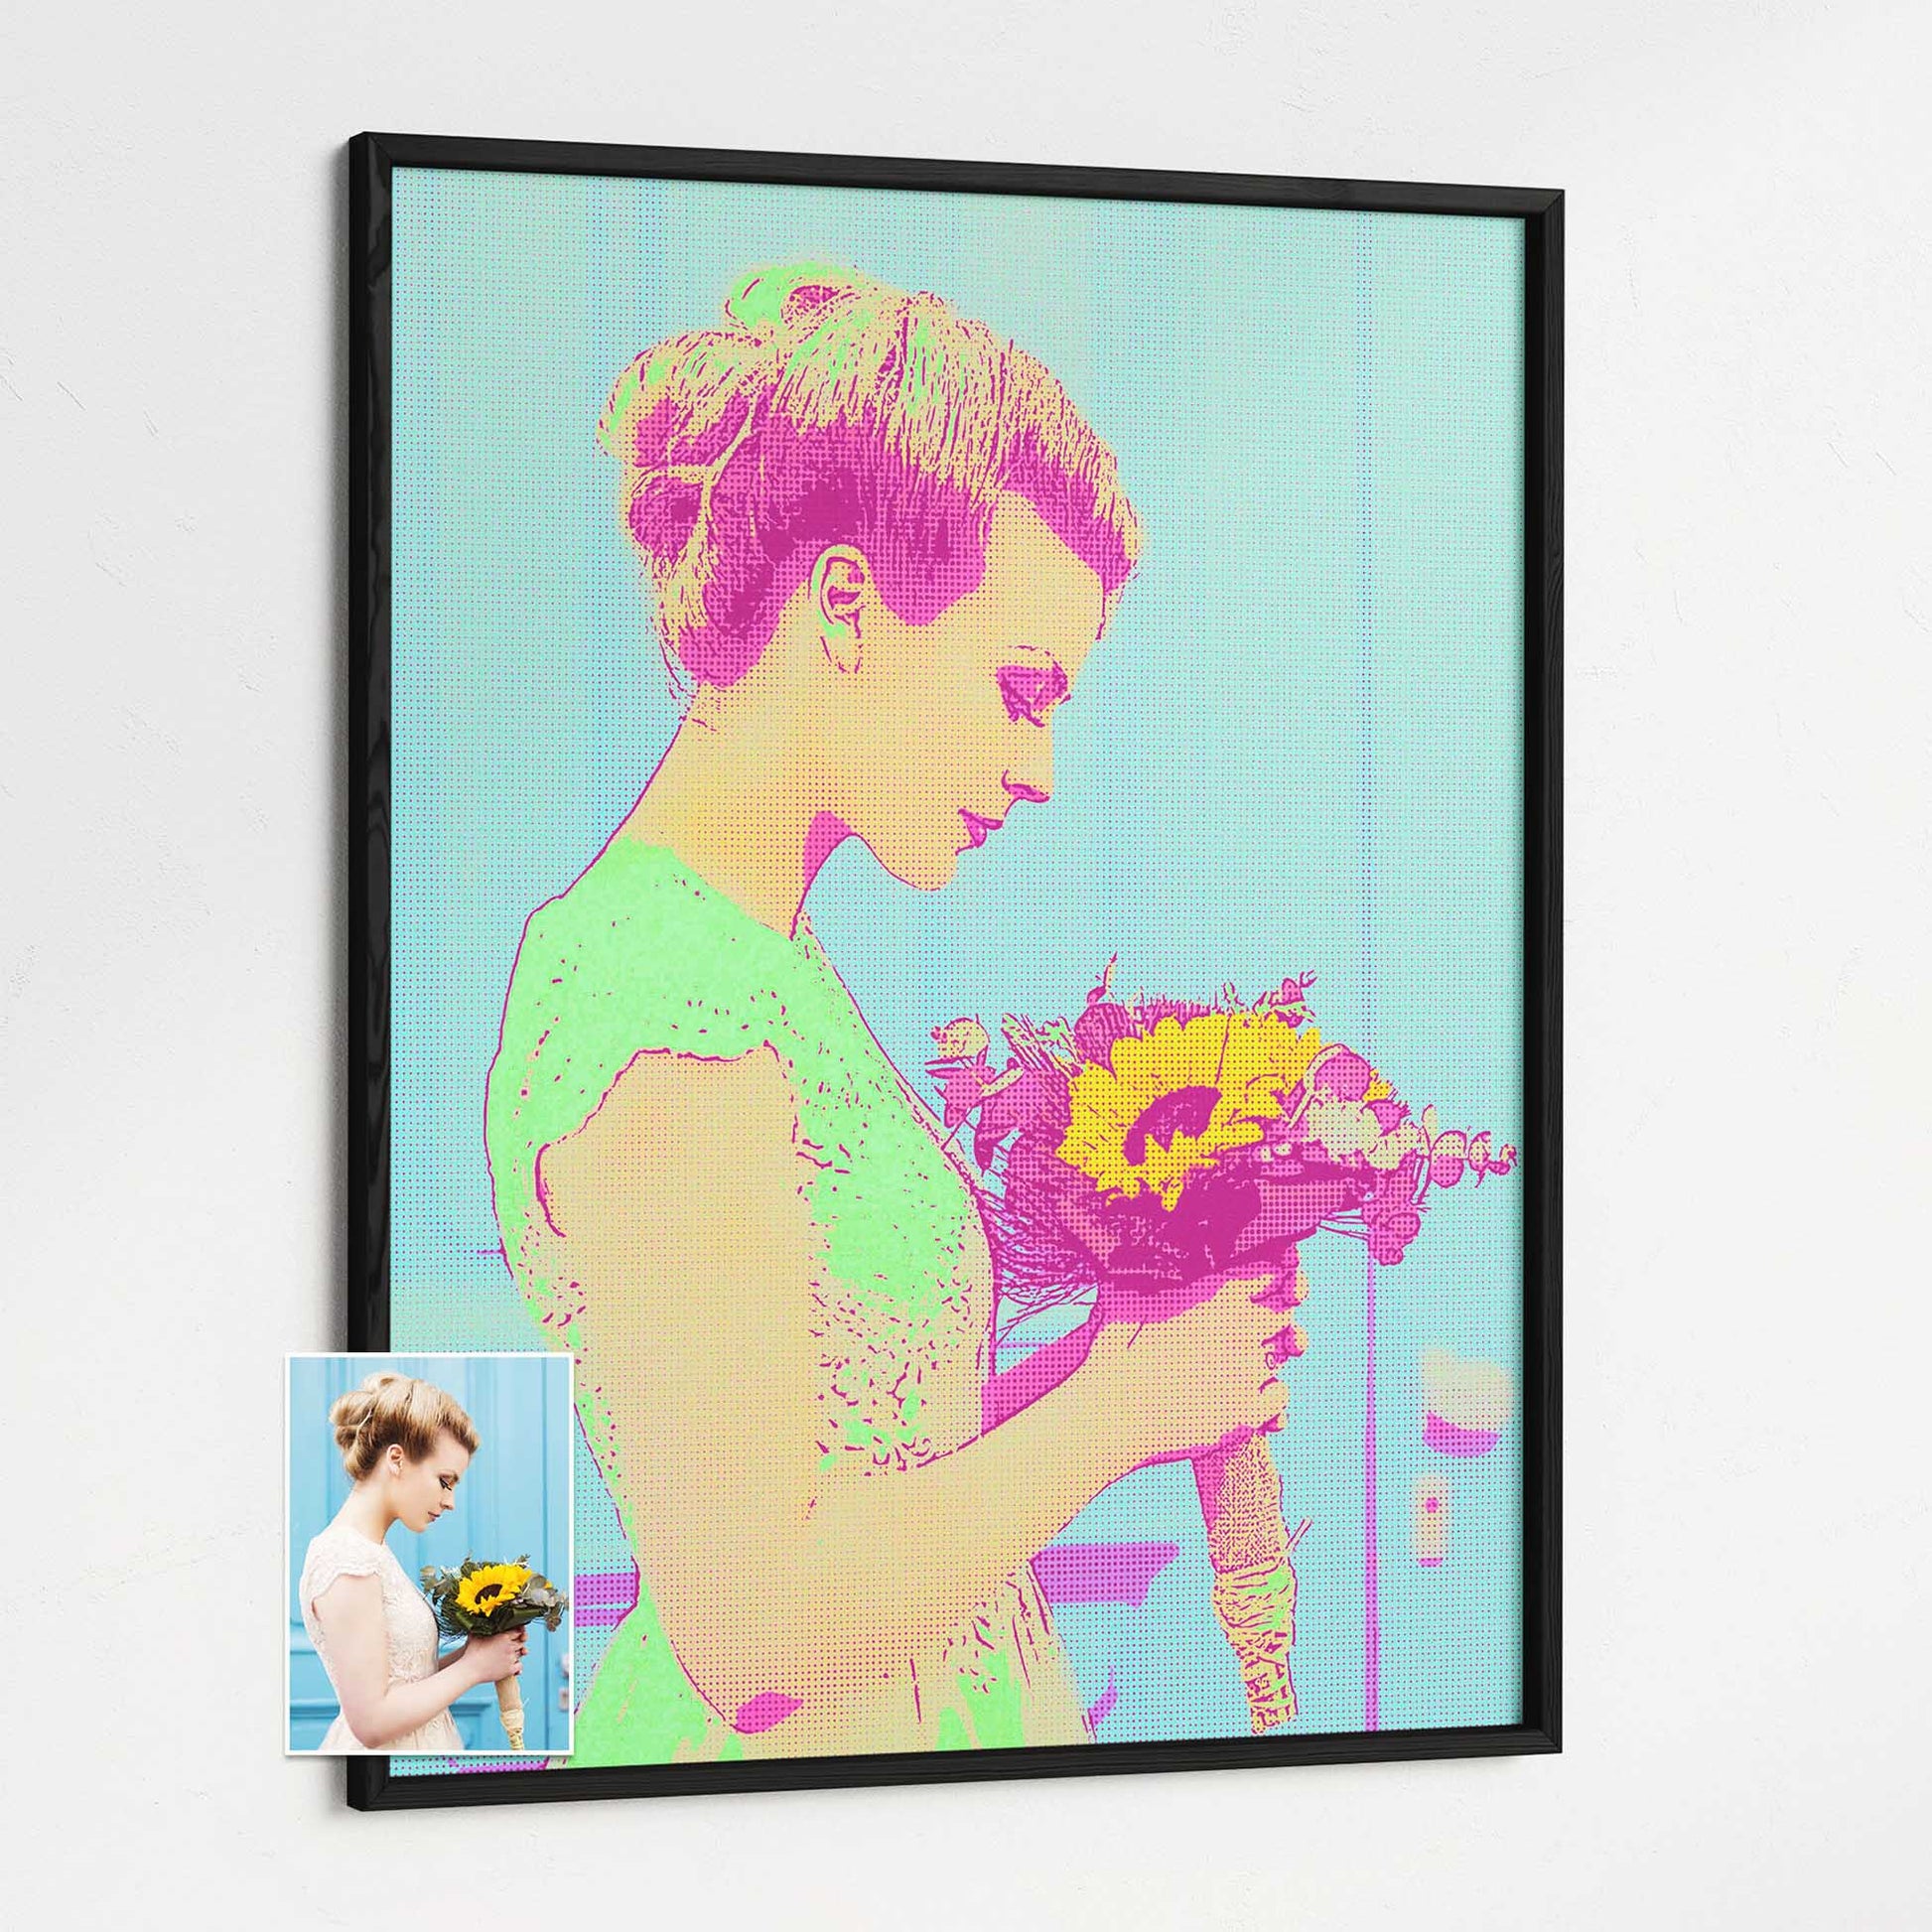 Add a pop of happiness to your walls with a Personalised Green & Pink Pop Art Framed Print from your photo. This vibrant and colorful artwork radiates joy and positivity, creating a cool and lively atmosphere. Crafted with thick museum paper